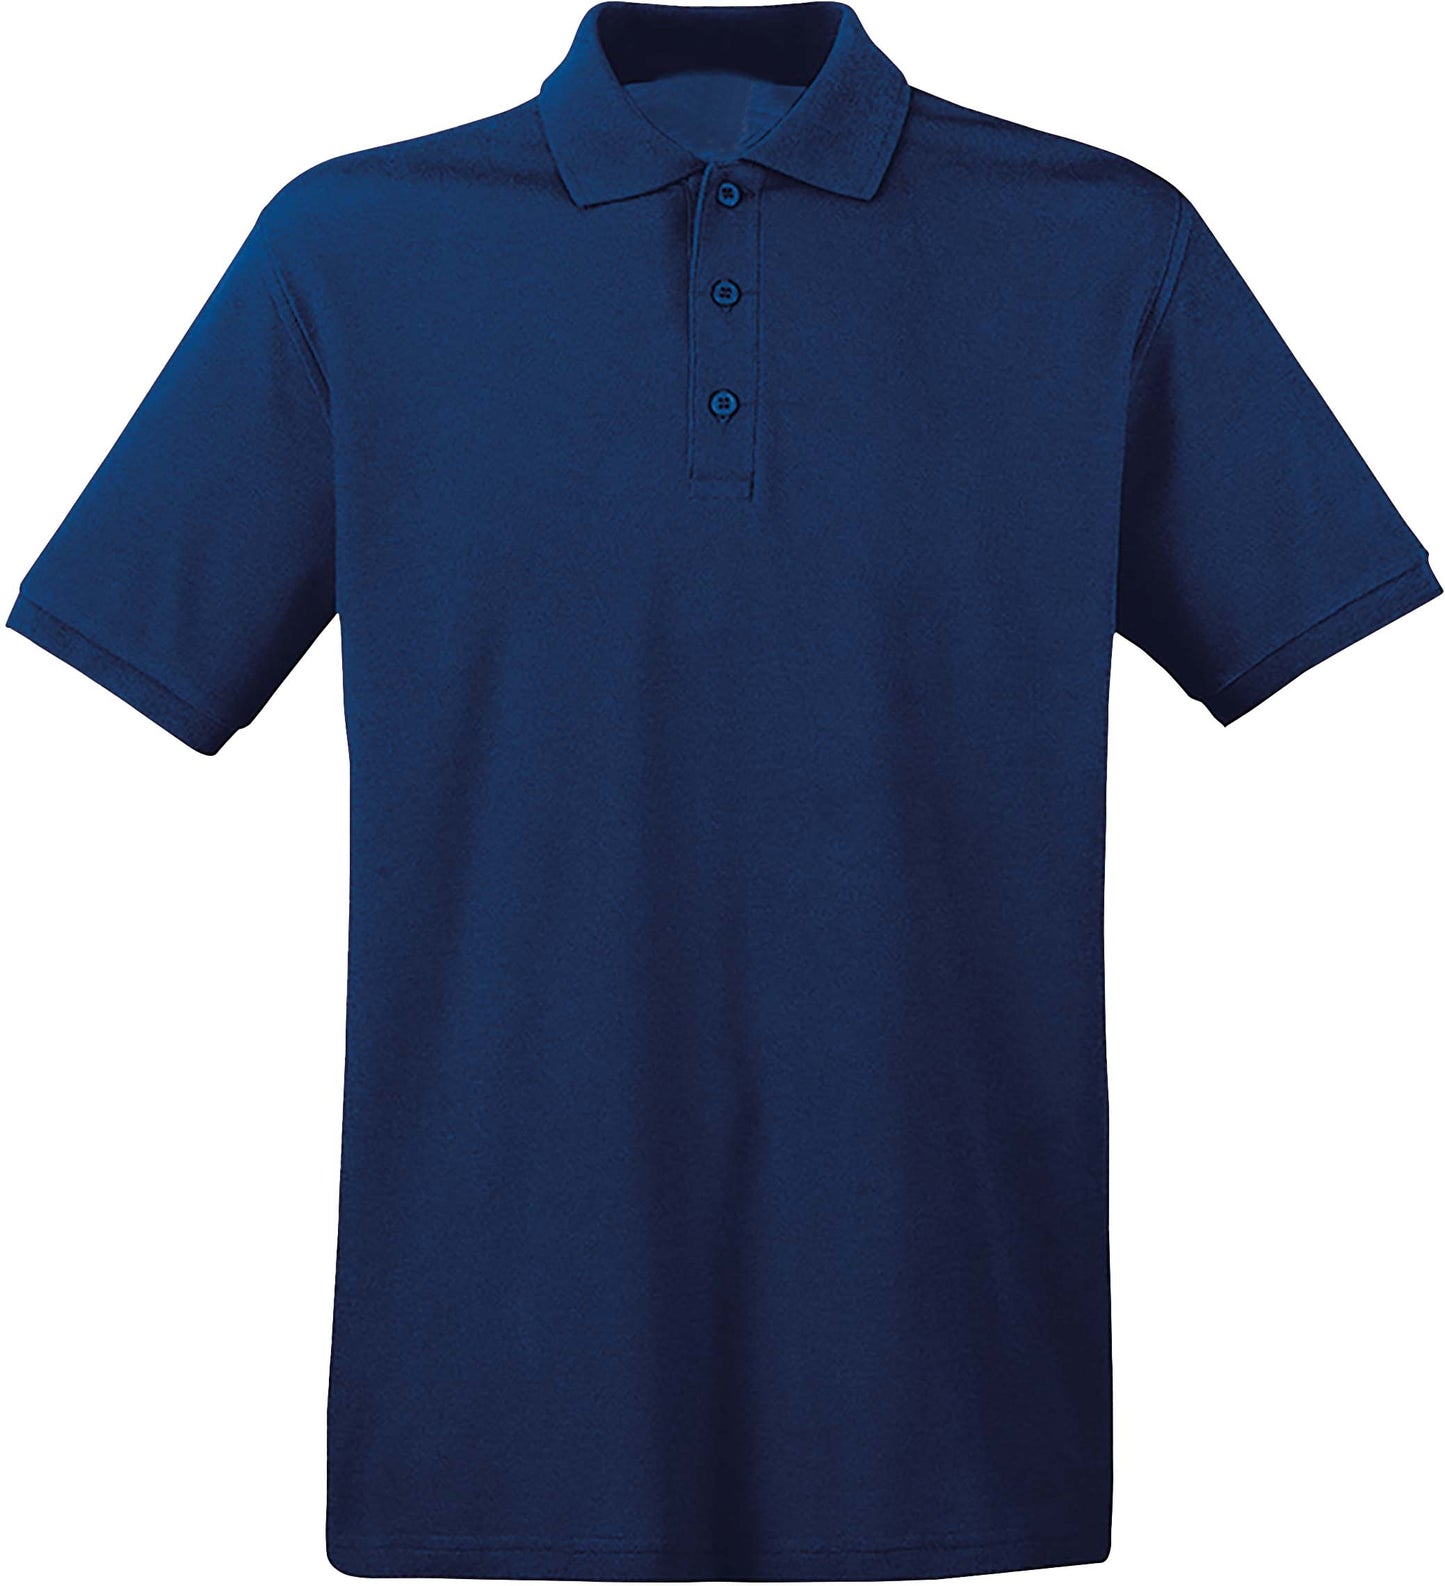 Workwear Text Polo Unisex T-shirt Save £3 per item when ordering 5 or more!